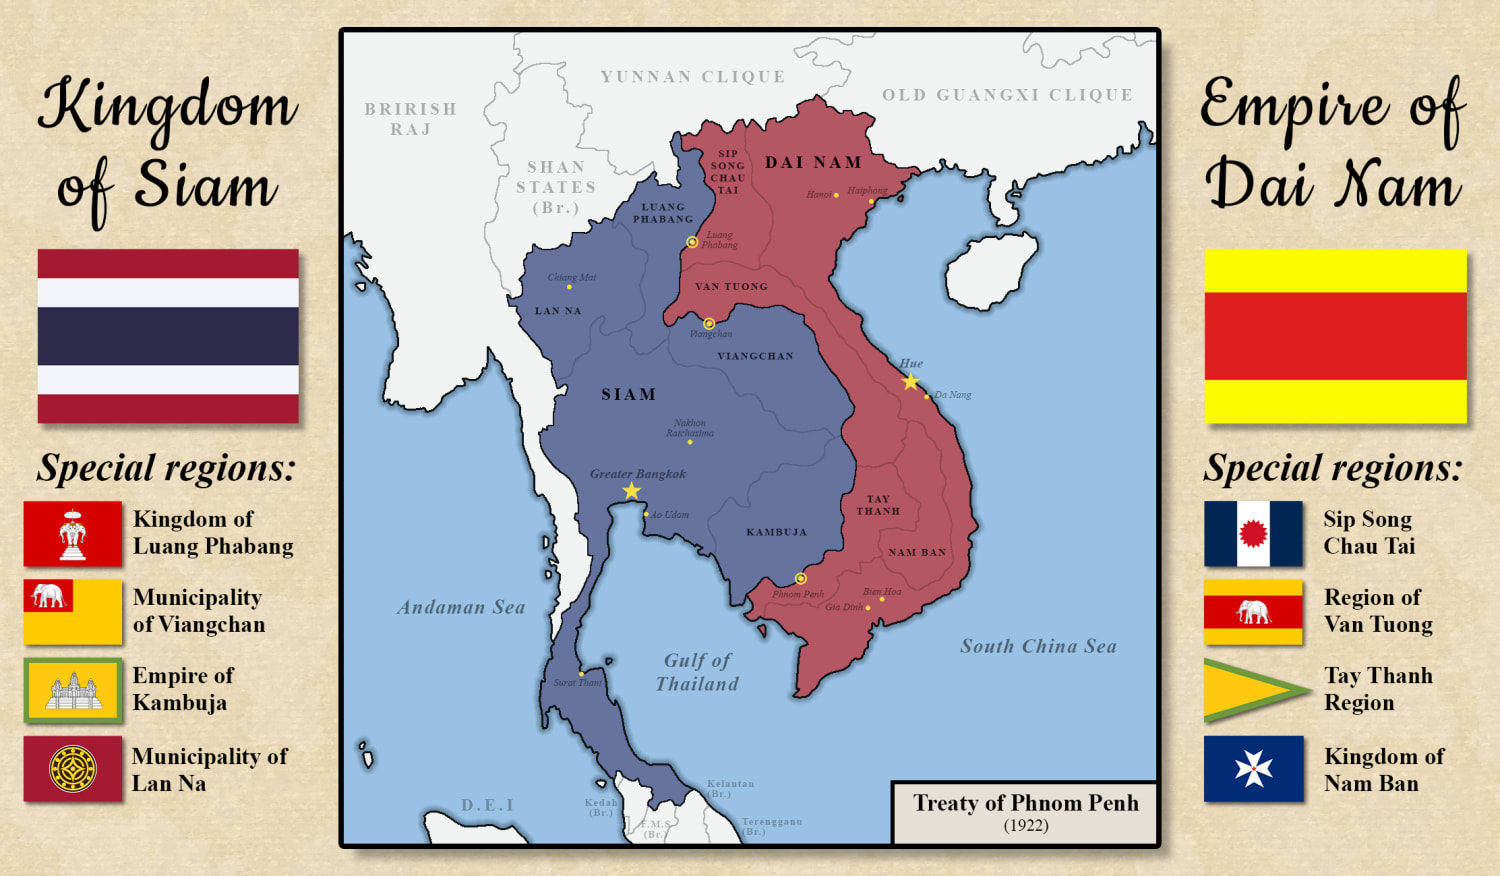 The partition of Laos and Cambodia (1922): An Indochina without France